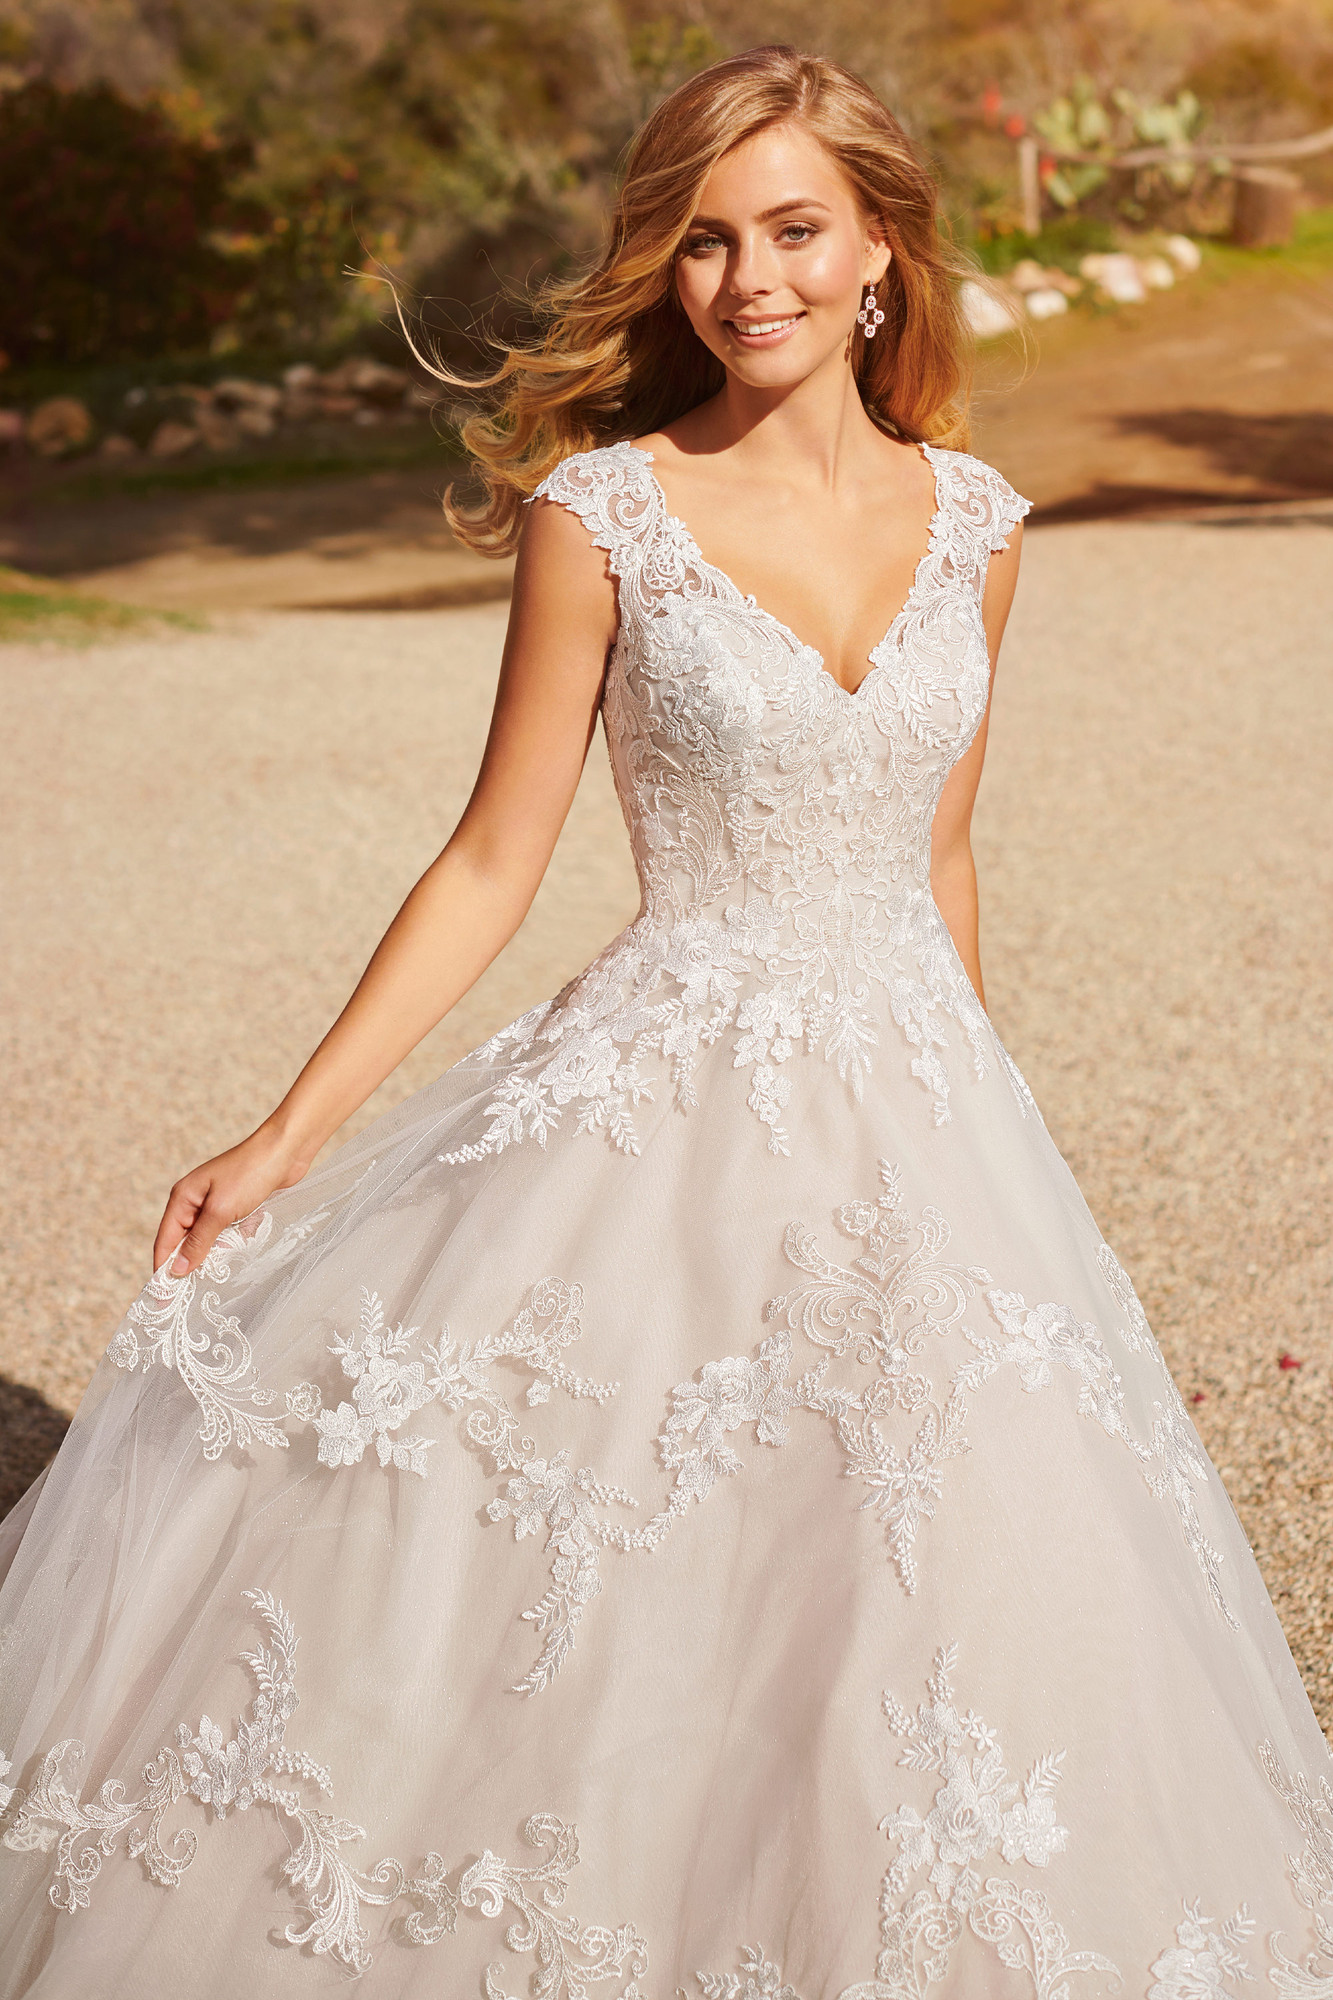 Amazing Mon Cheri Wedding Dresses Prices in the world The ultimate guide 